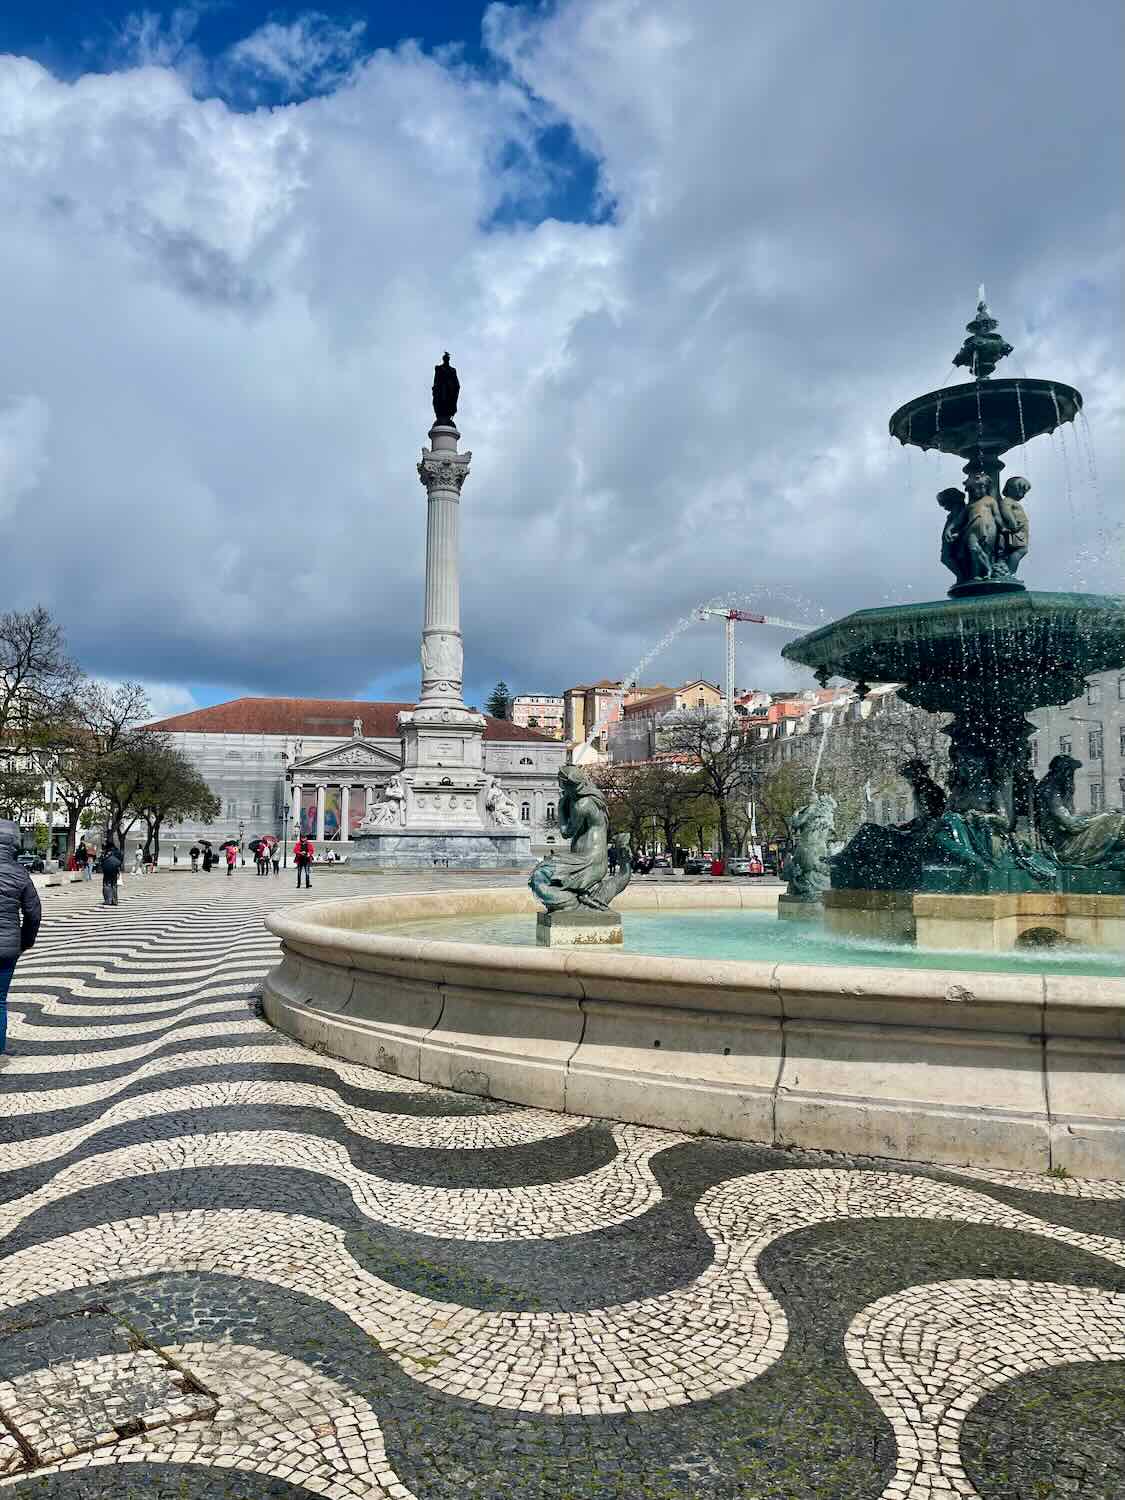 Rossio Square in Lisbon, Portugal, on a cloudy day, showcasing the patterned cobblestone pavement, Baroque fountain, and the Pedro IV monument.